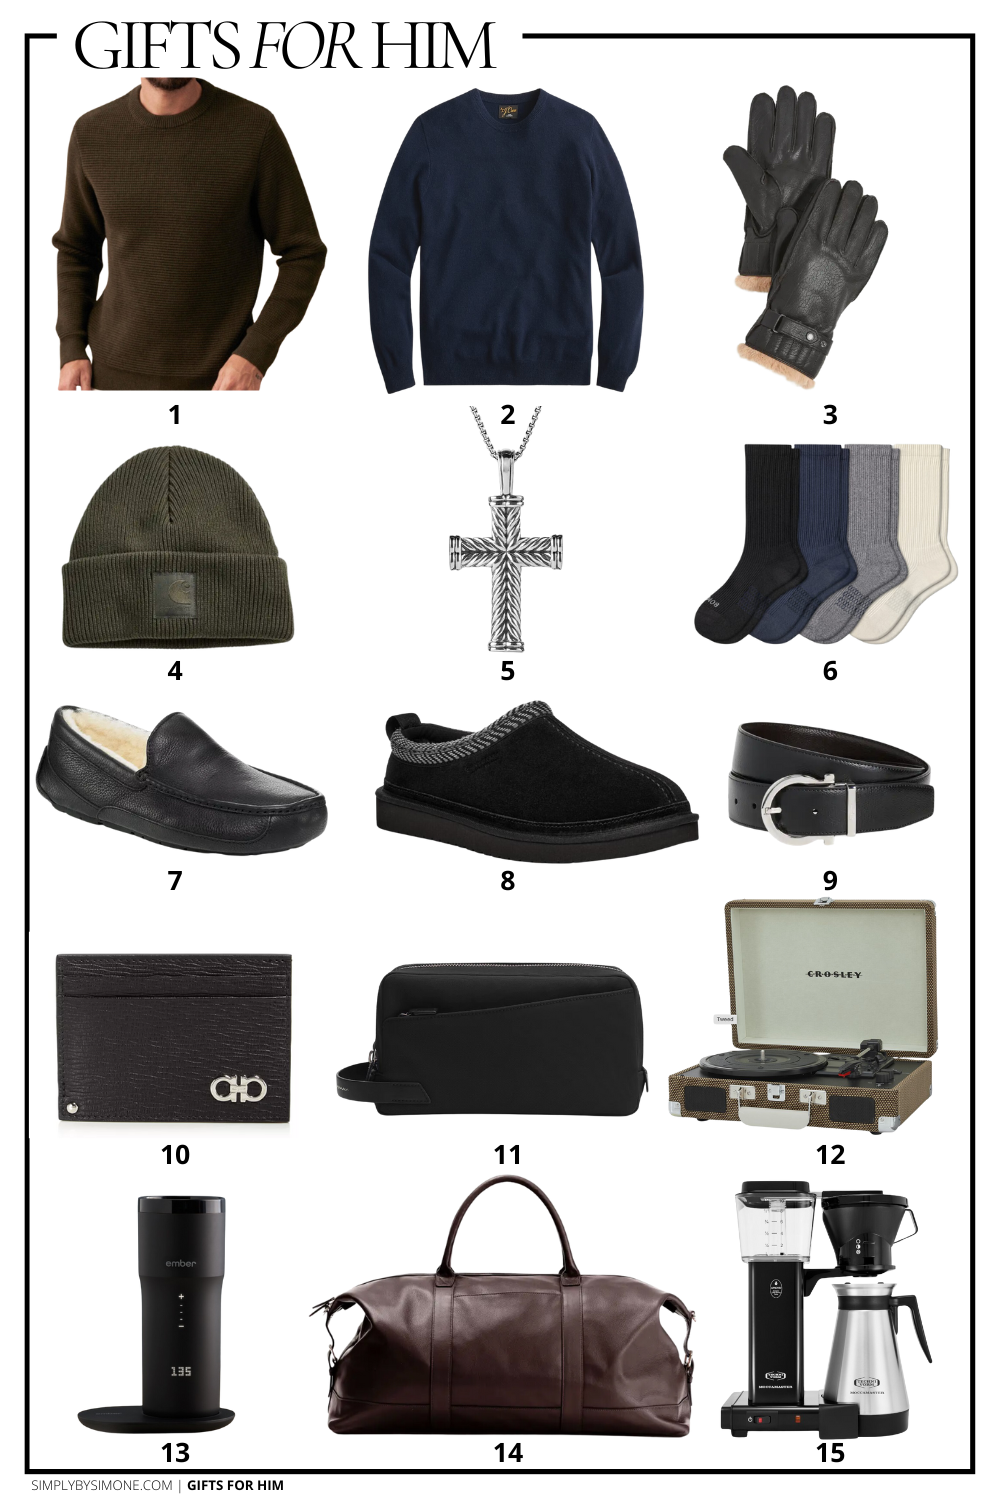 Gift Ideas for Him Items 1 to 15, List of Valentine's Day Gifts for Him